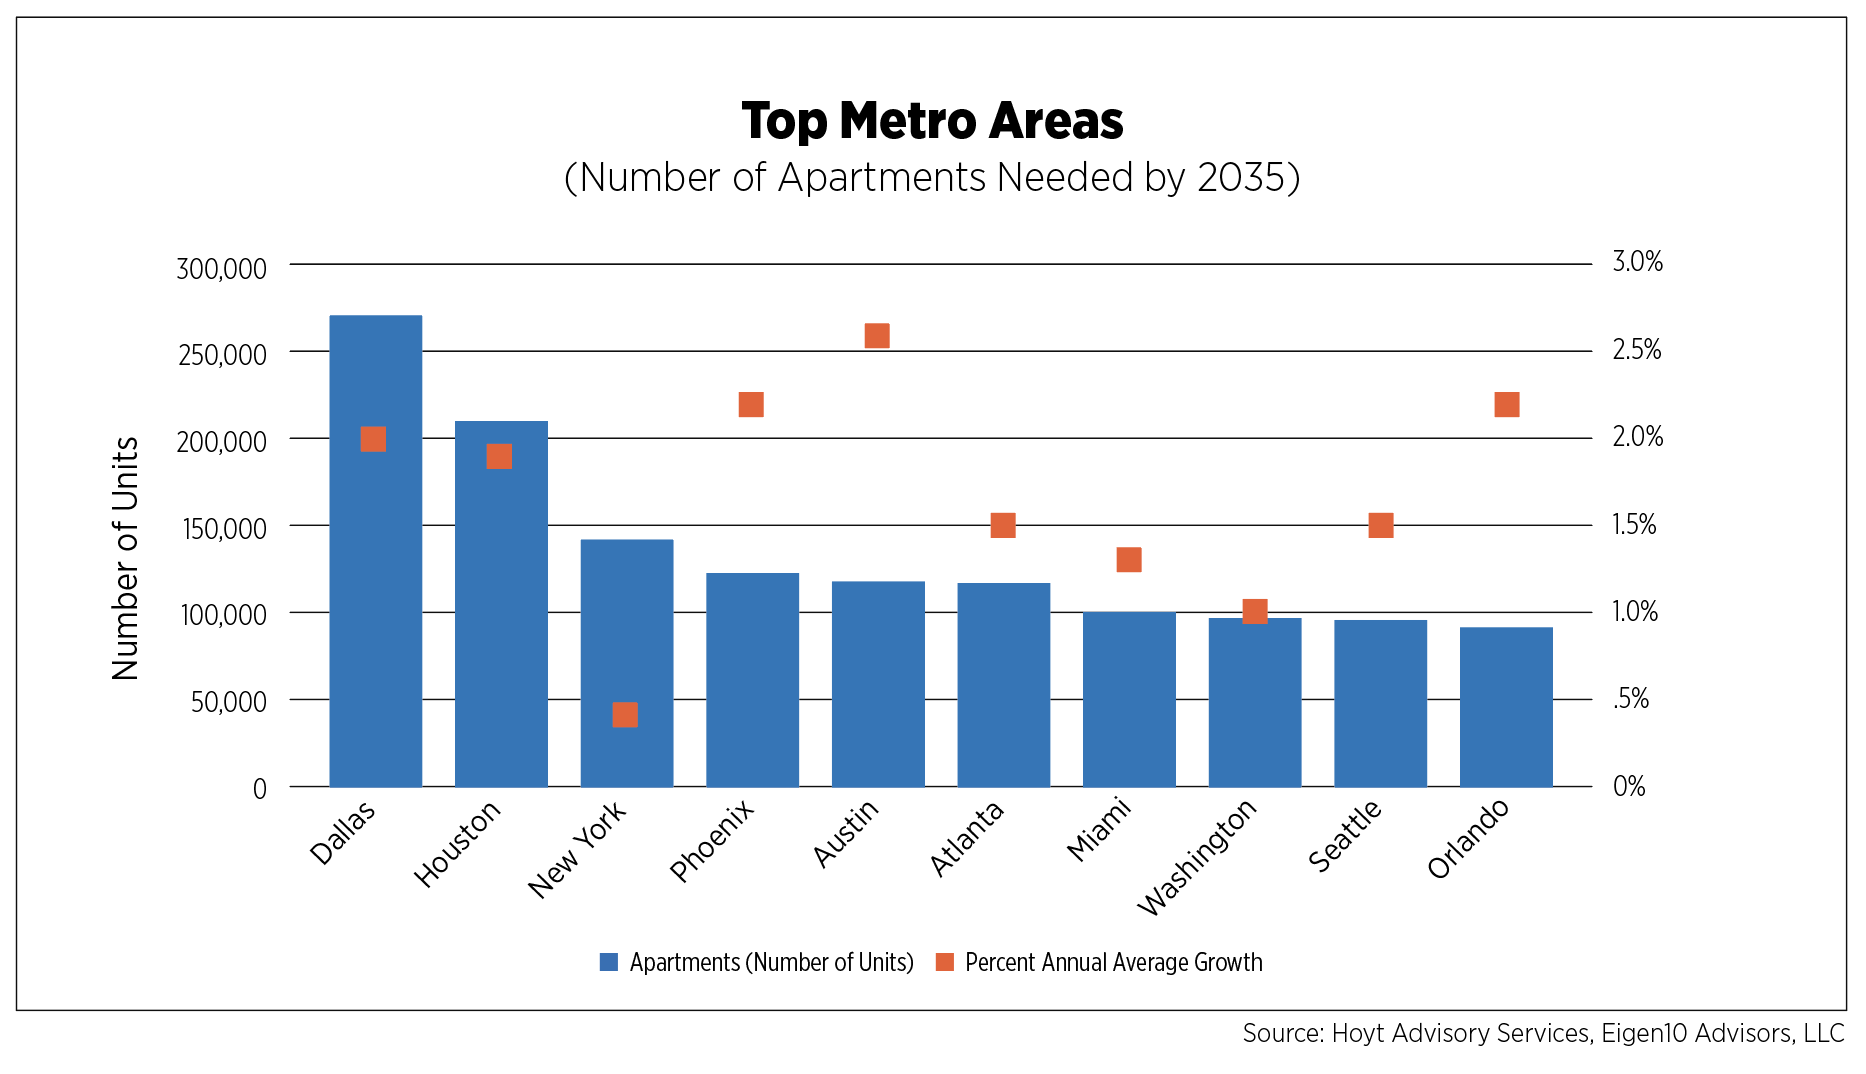 Top Metro Areas (Number of Apartments Needed by 2035)